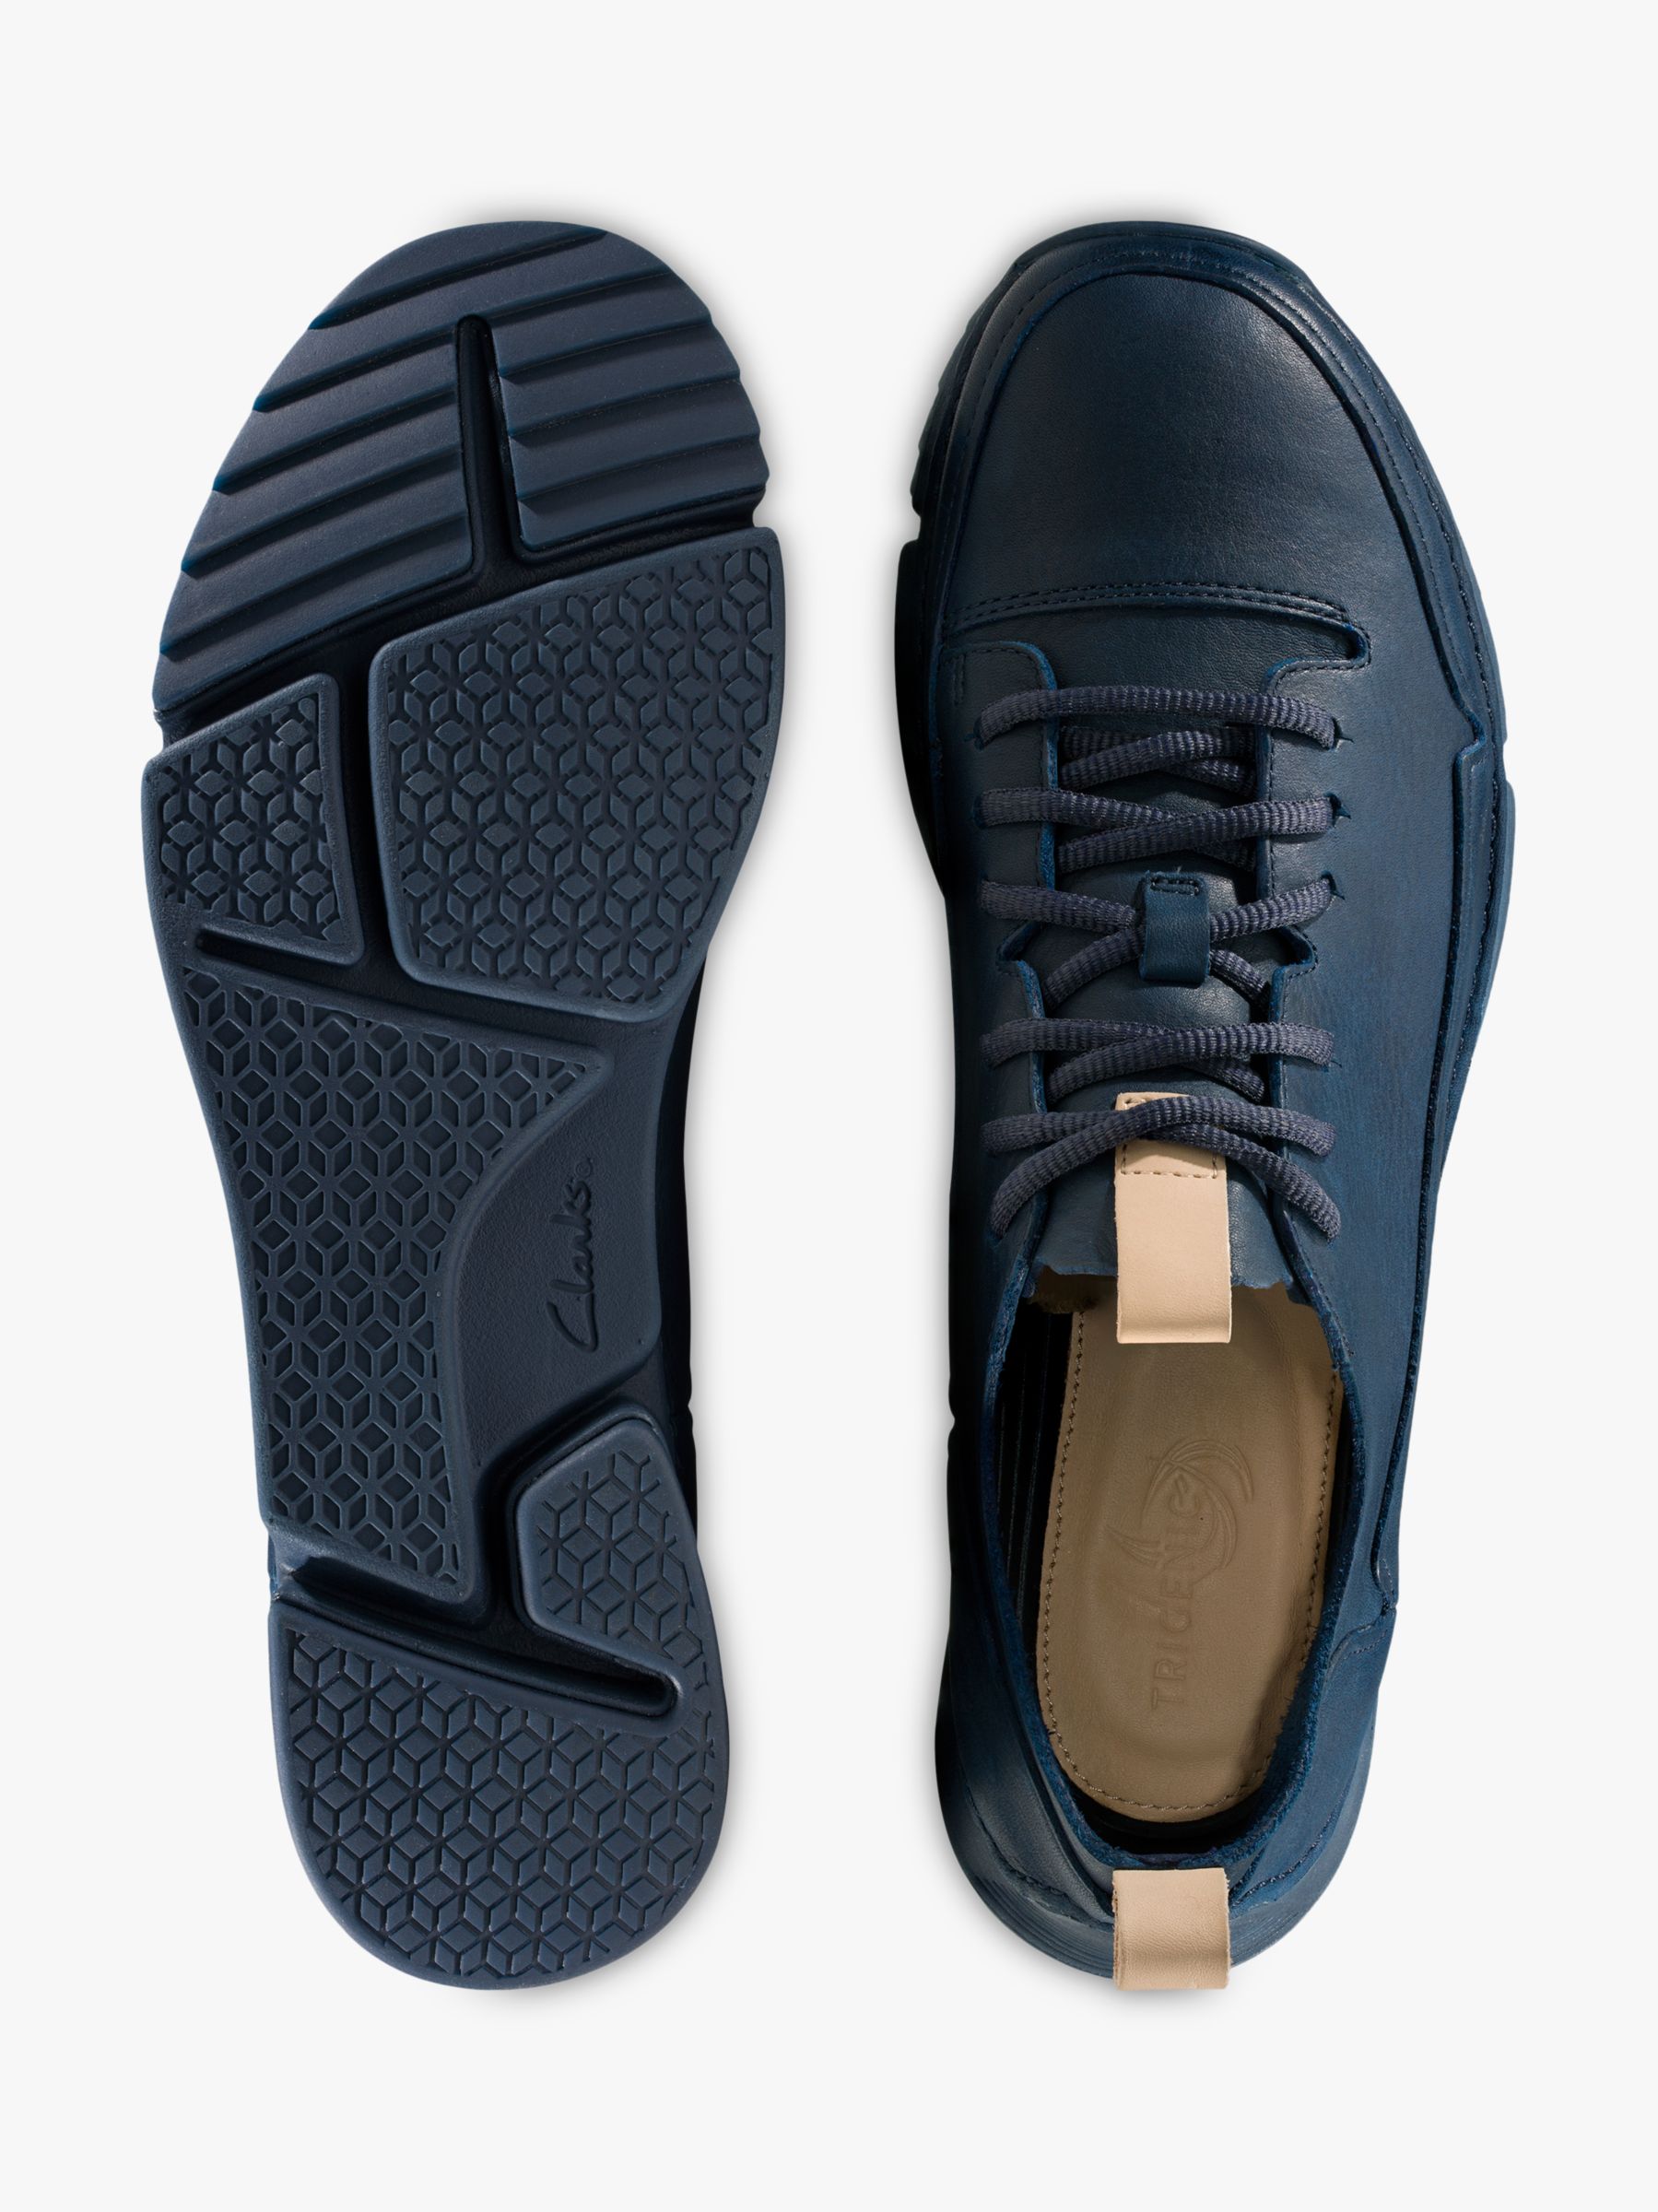 clarks tri spark trainers